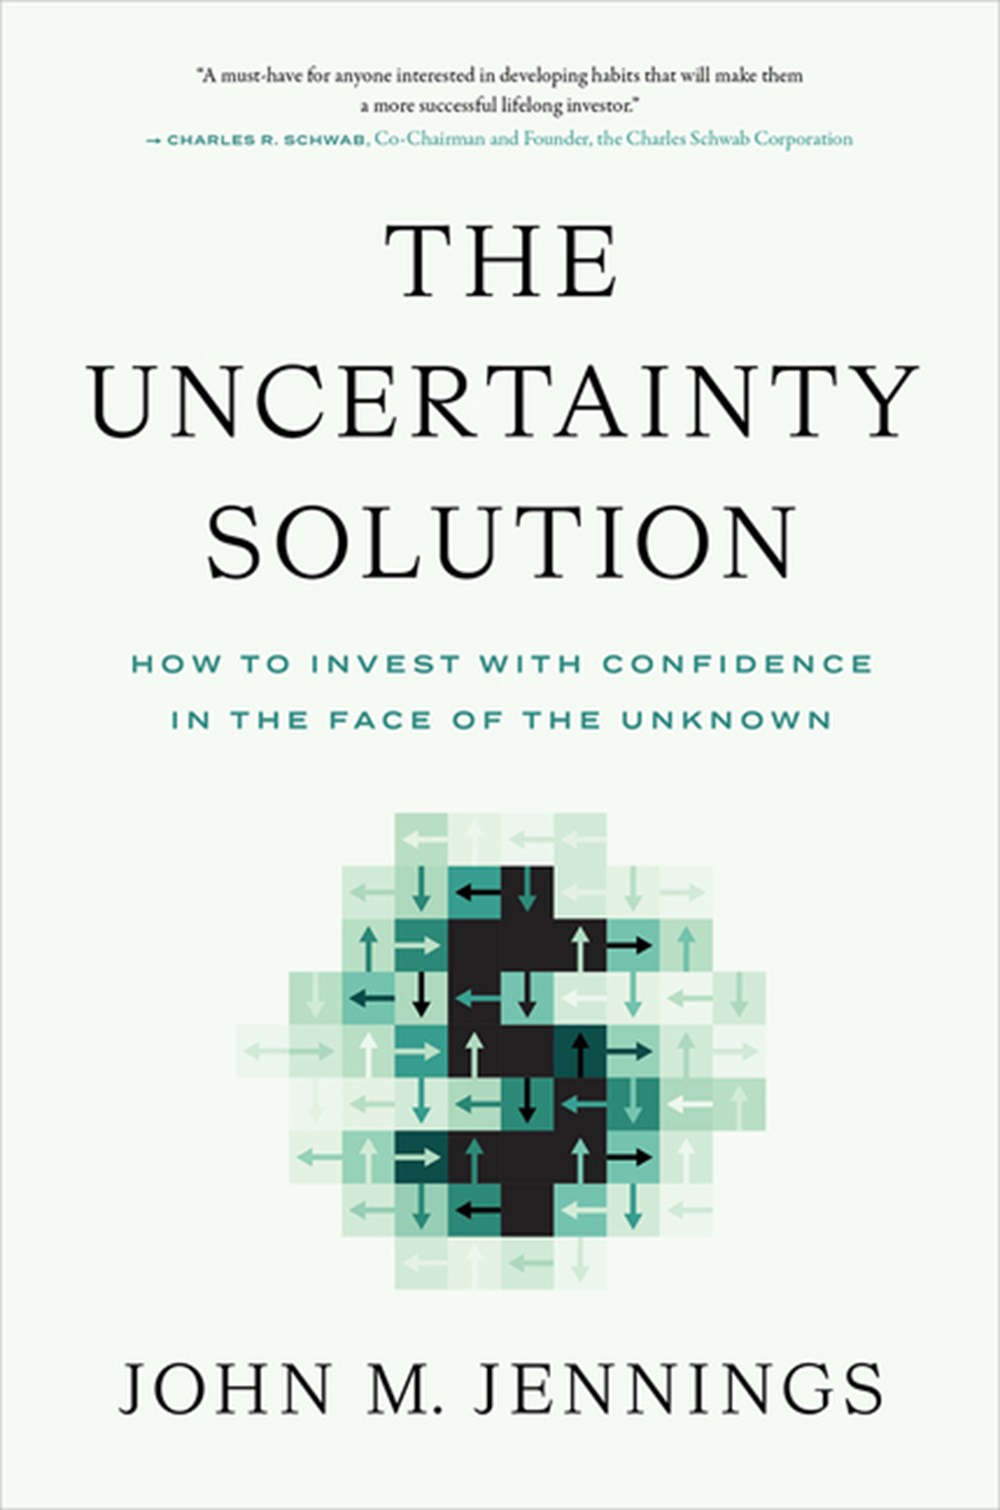 Uncertainty Solution: How to Invest with Confidence in the Face of the Unknown